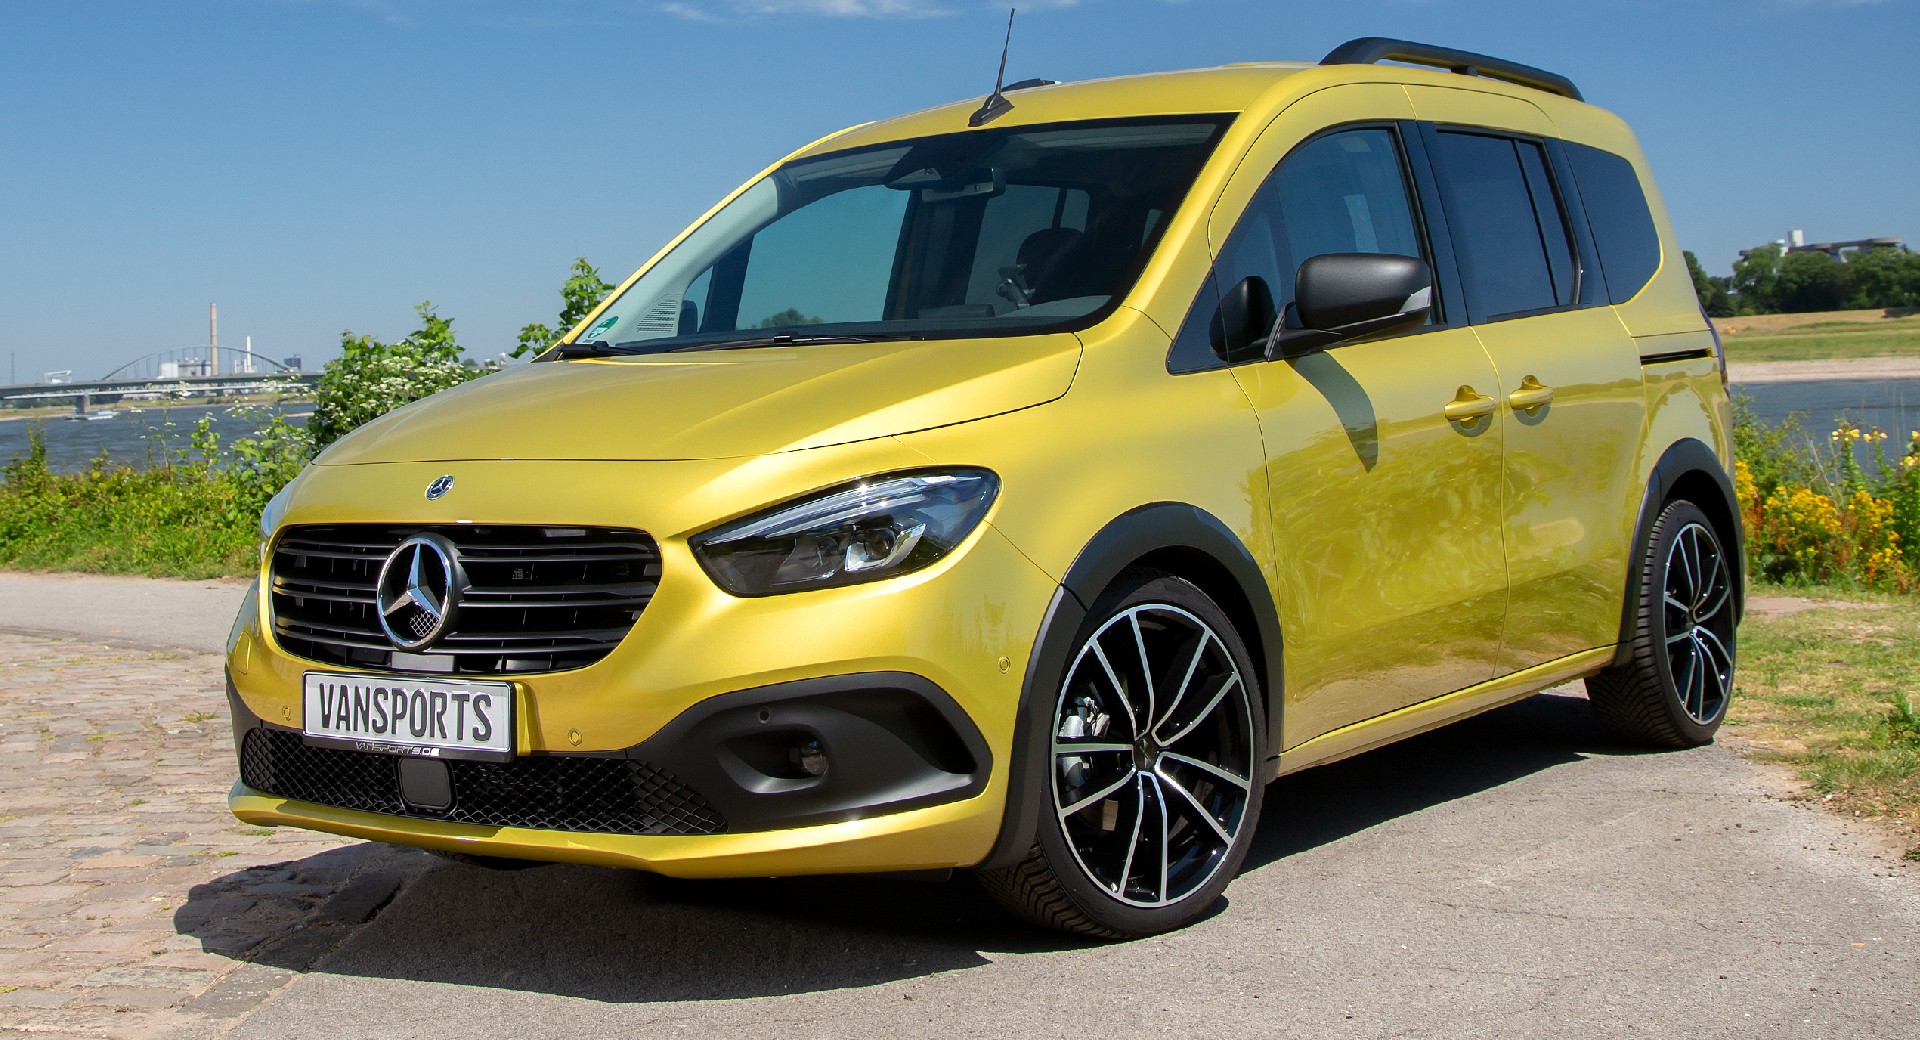 2022 Mercedes-Benz Citan Brings More Style And Substance To Small